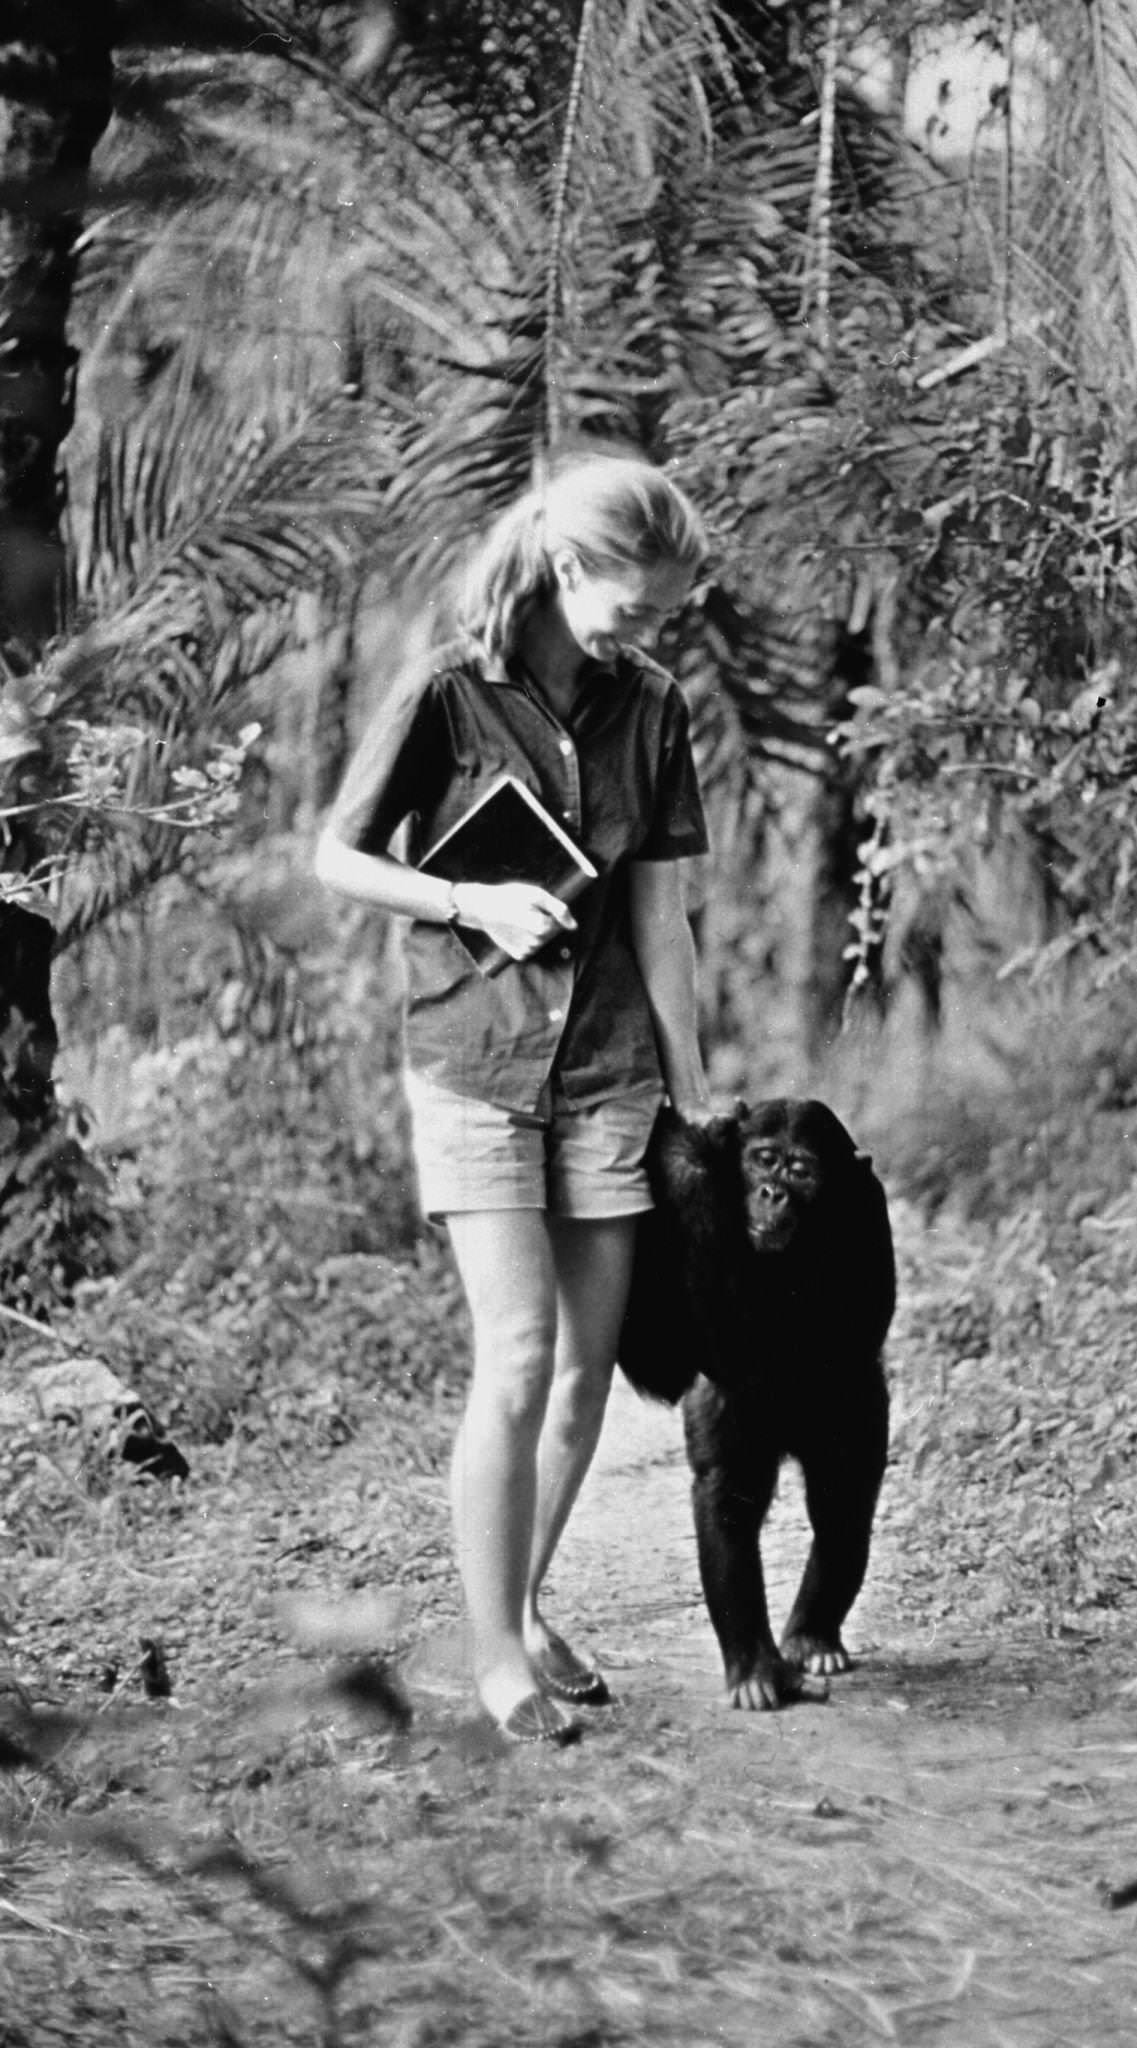 Jane Goodall appears in the television special "Miss Goodall and the World of Chimpanzees" originally broadcast on CBS, Wednesday, December 22, 1965.